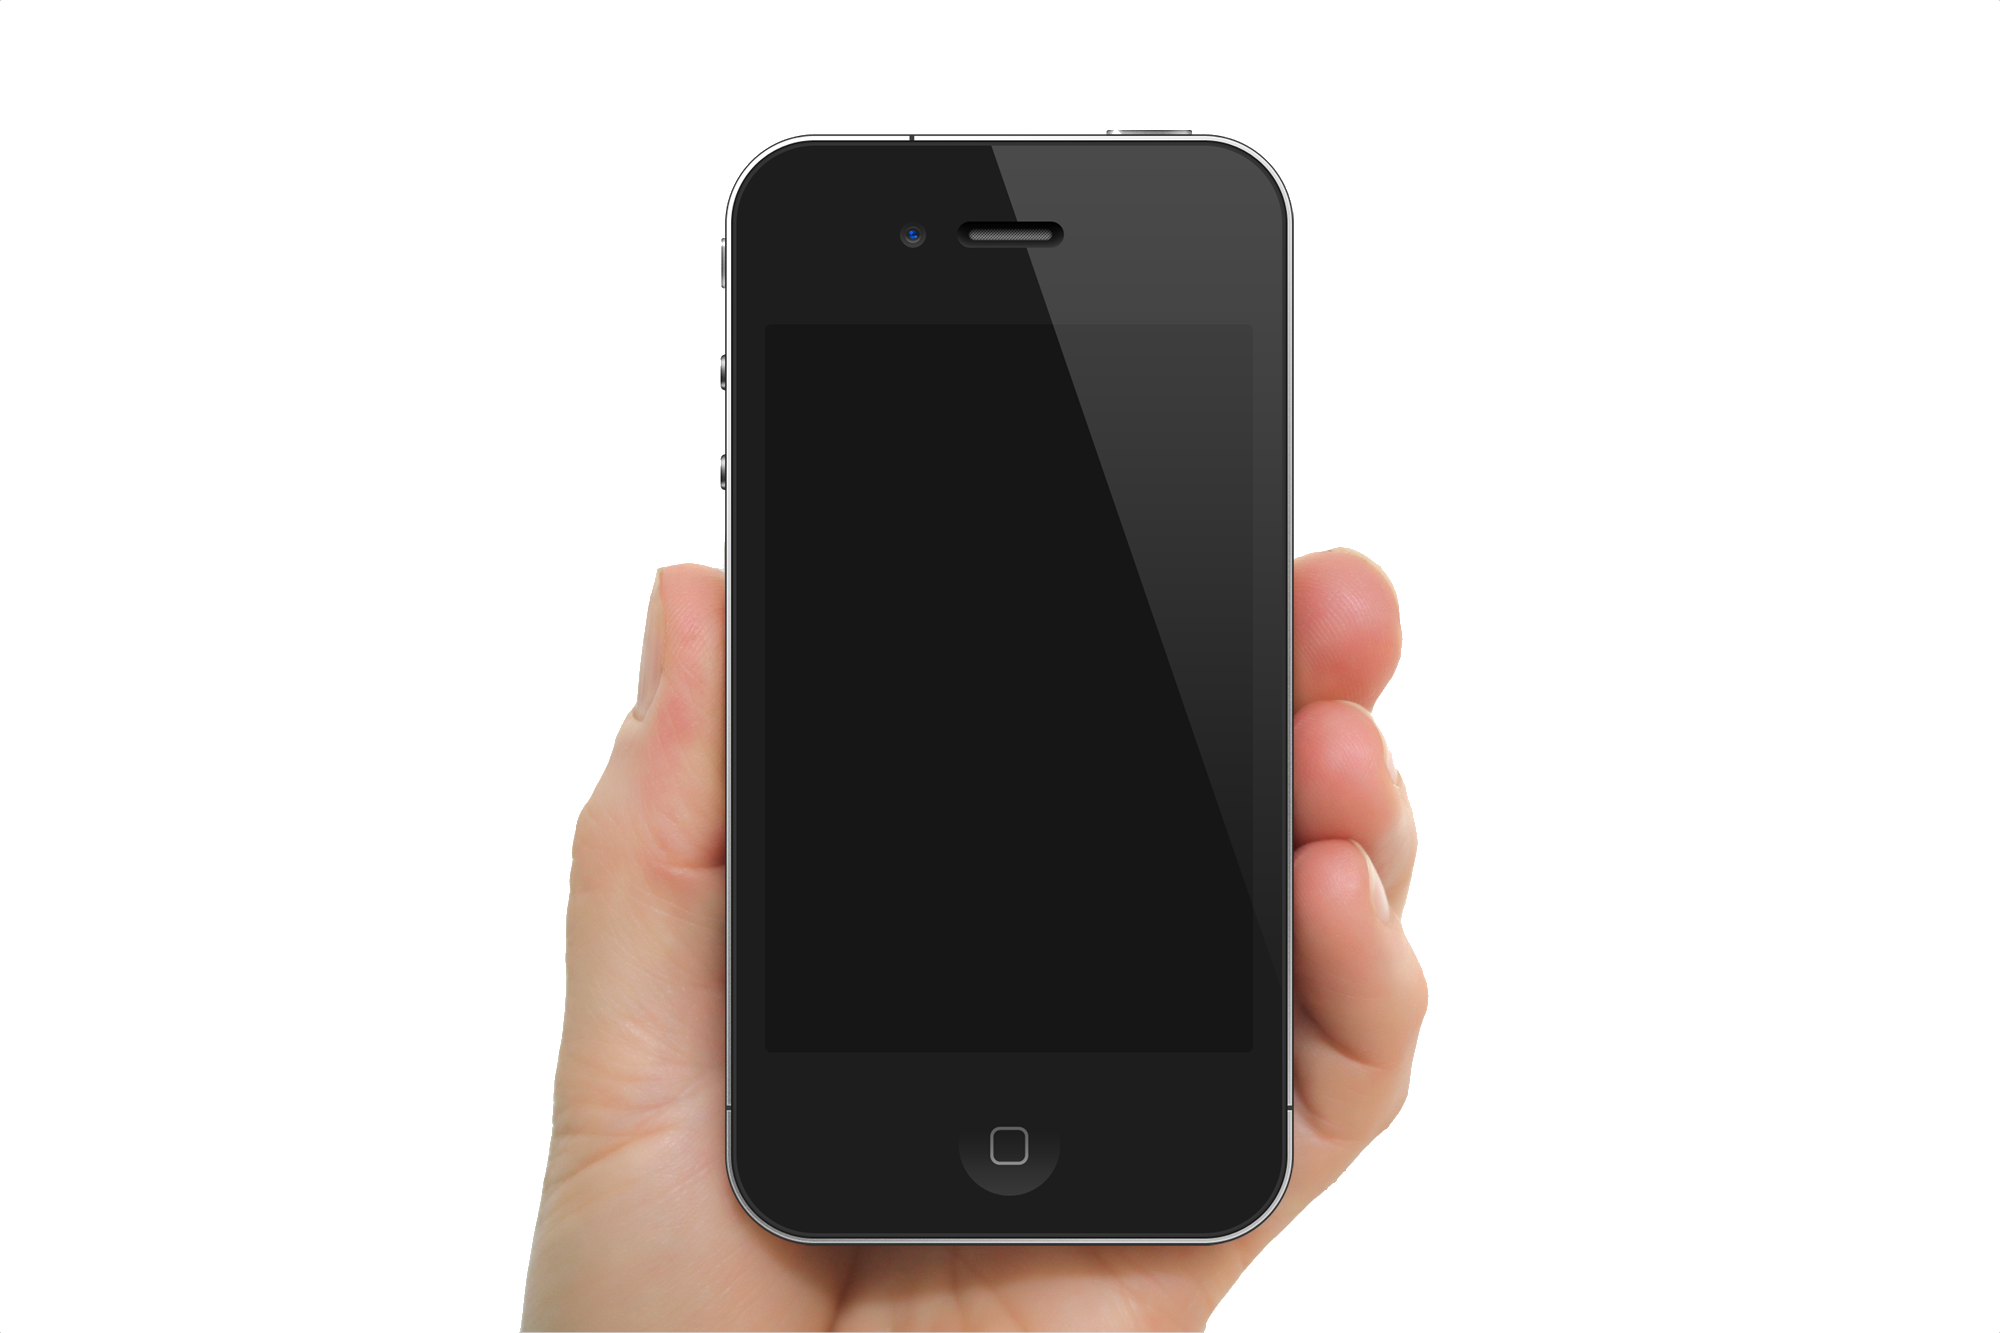 Iphone in hand PNG image